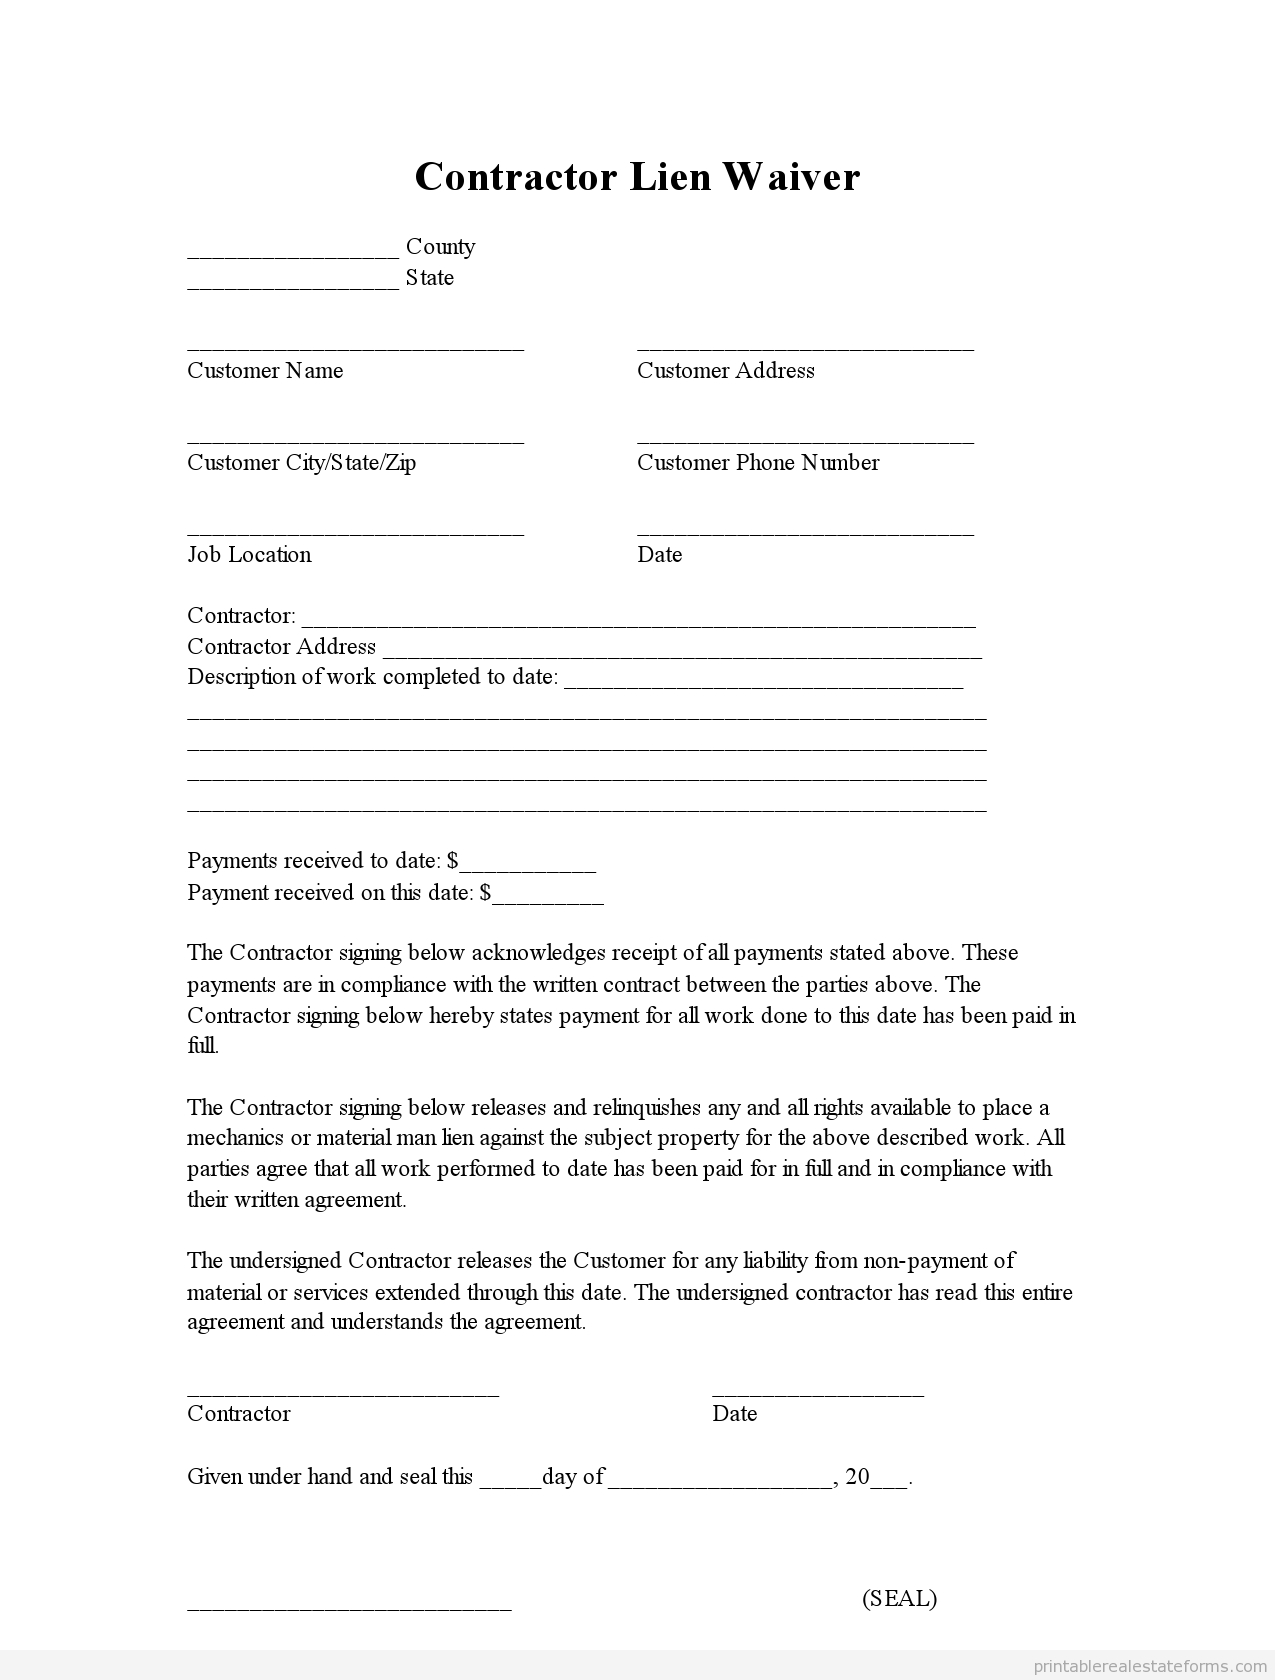 Constructive Eviction Letter Template - Sample Printable Contractor Lien Waiver form